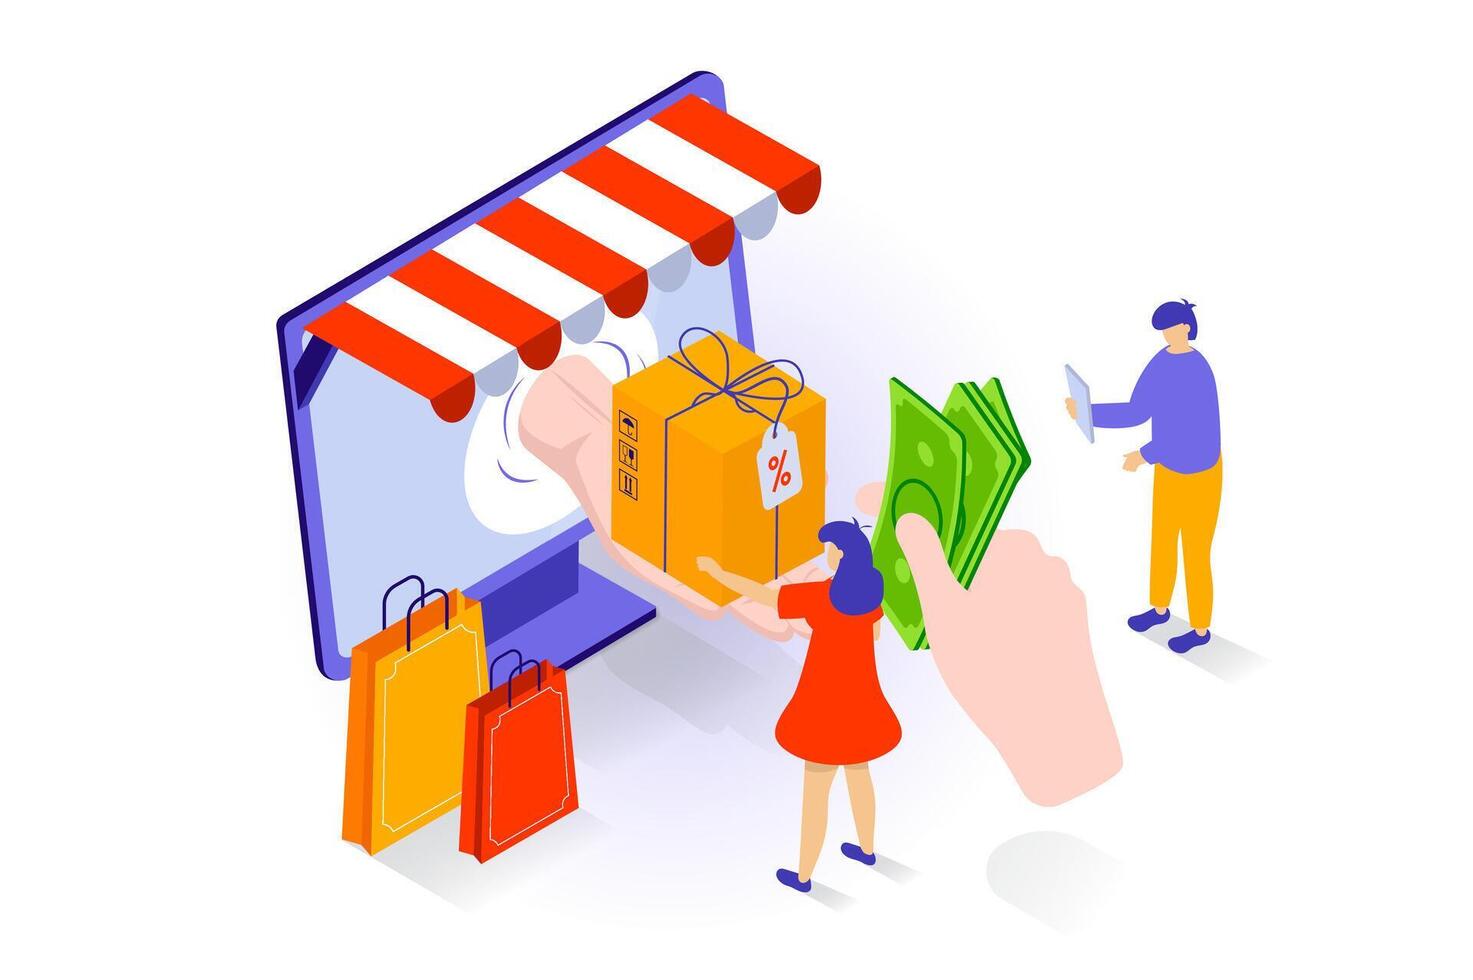 Online shopping concept in 3d isometric design. People ordering products, paying by webpage digital form, receive parcel with delivery service. Vector illustration with isometry scene for web graphic